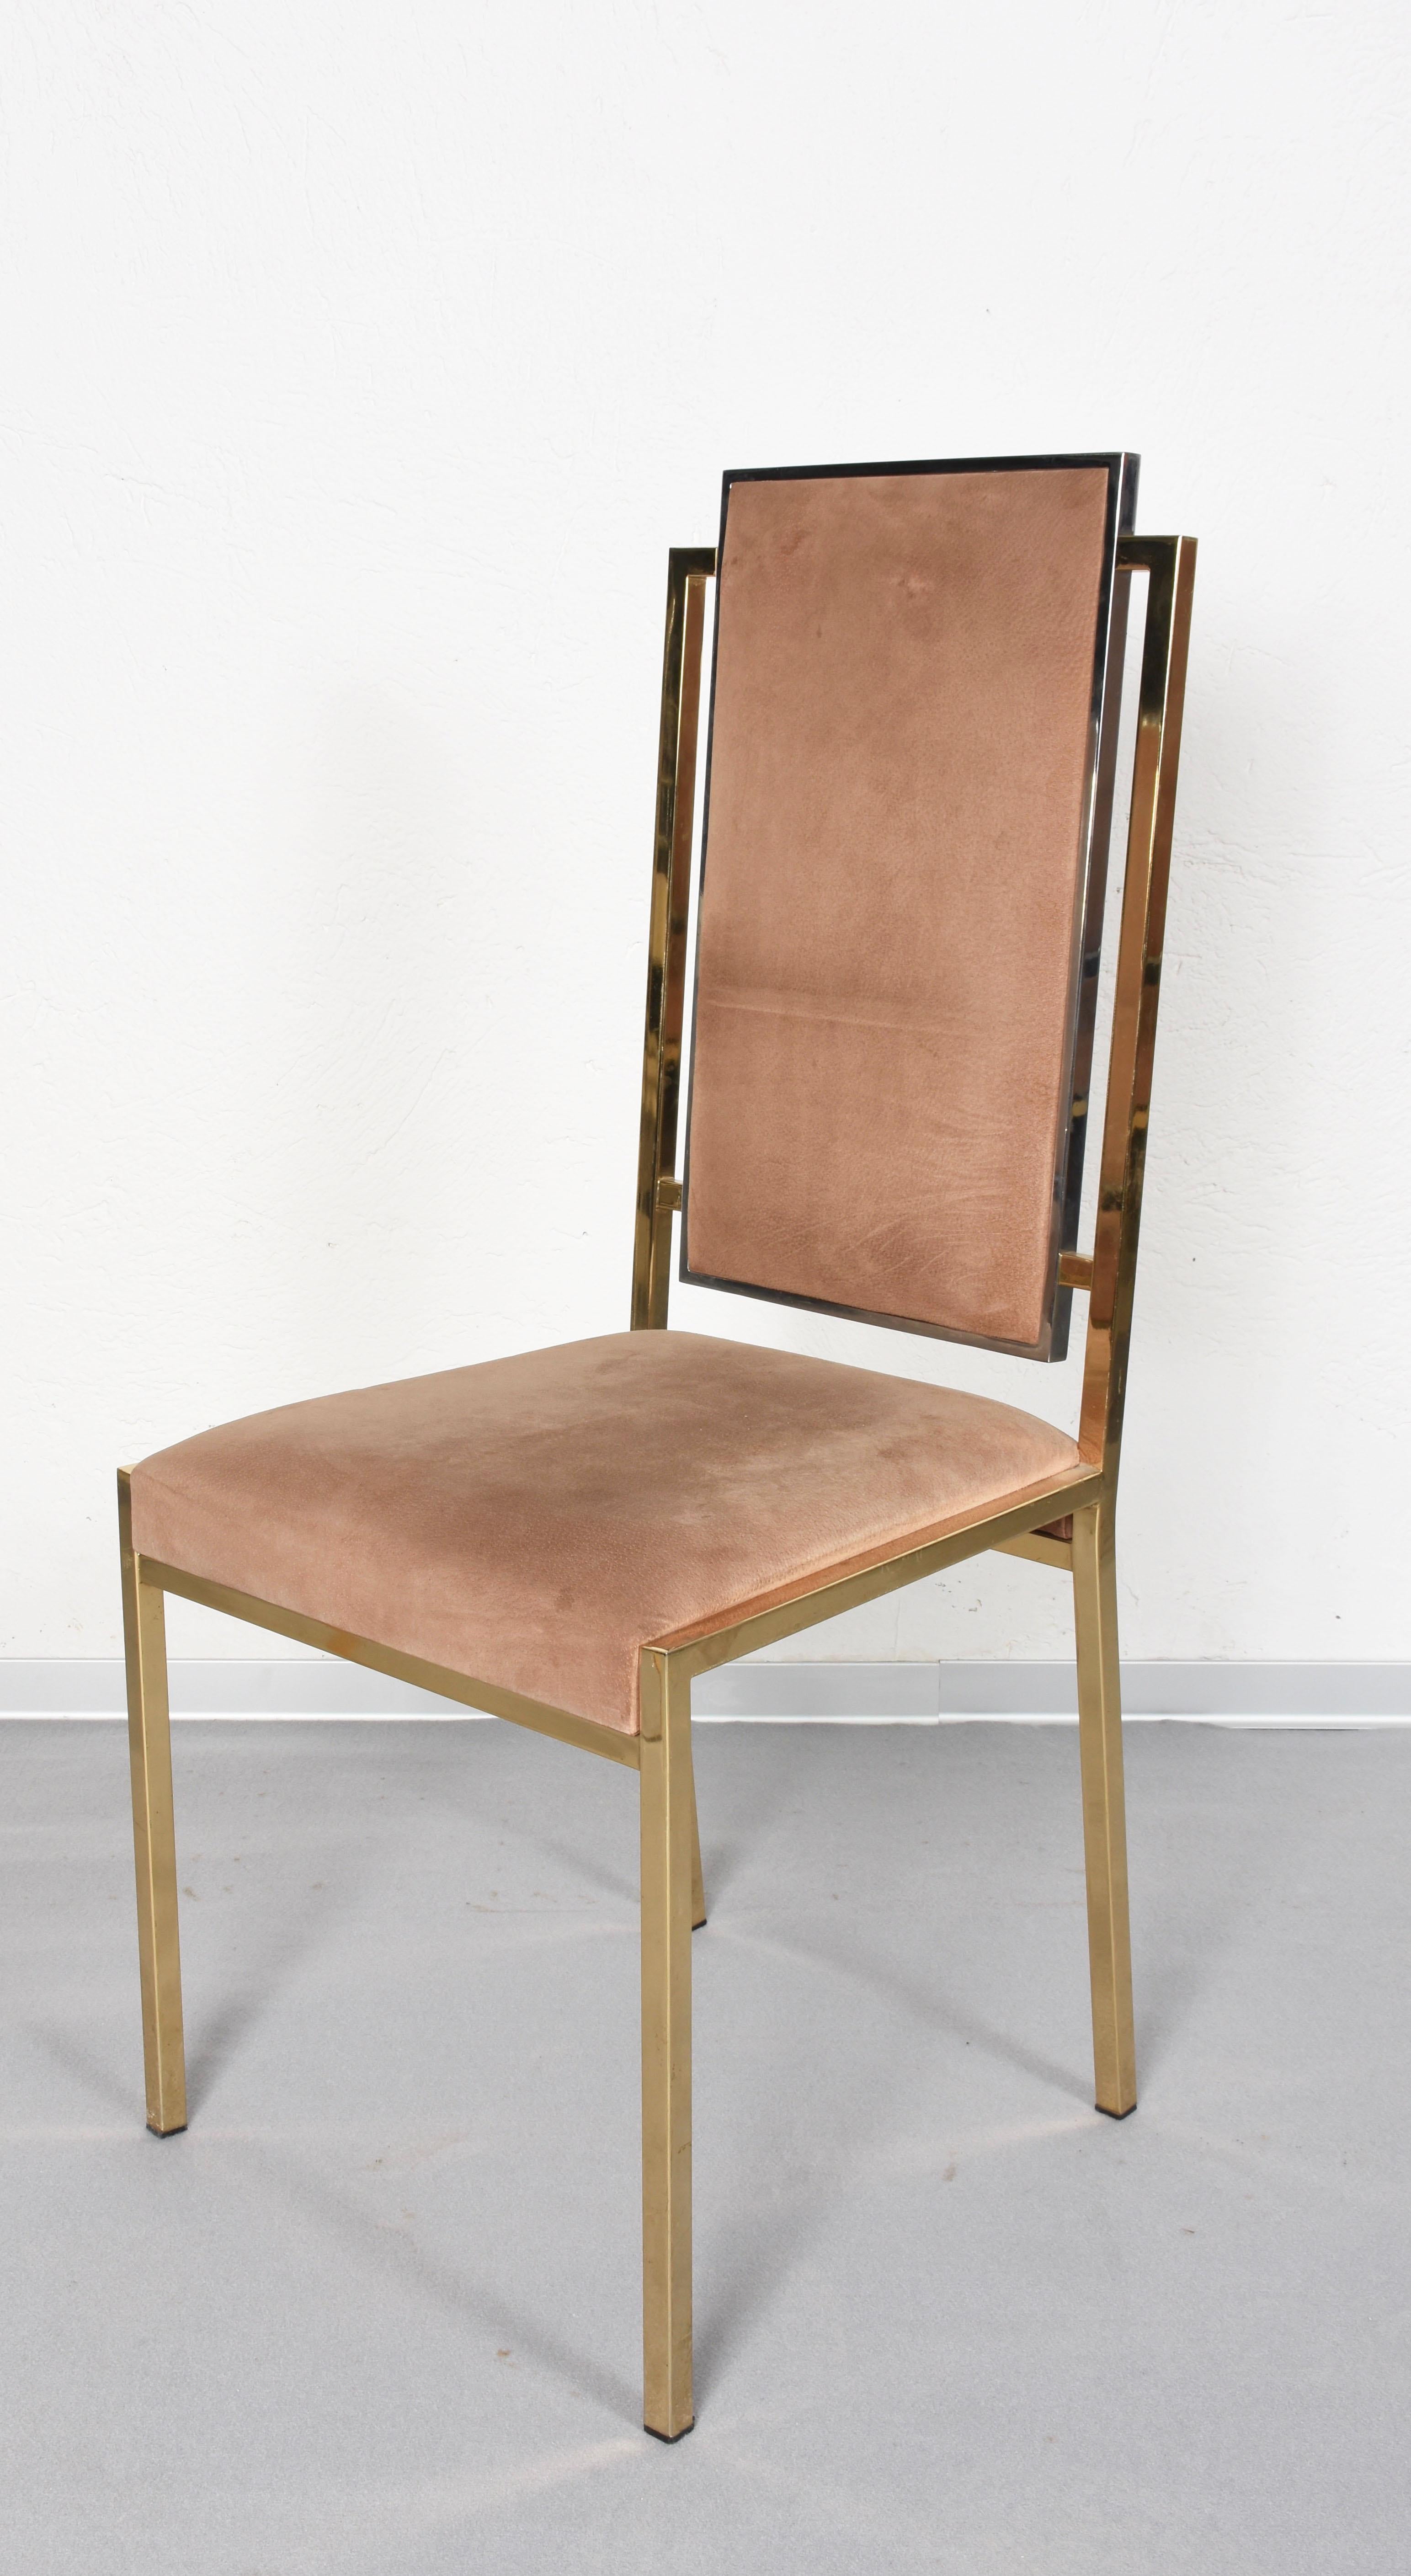 Set of 4 dining chairs in brass and chrome steel. Seat and back in alcantara, 1970s - Good vintage condition. Some signs of aging.
We have extraordinary tables after Romeo Rega that can be combined with these chairs